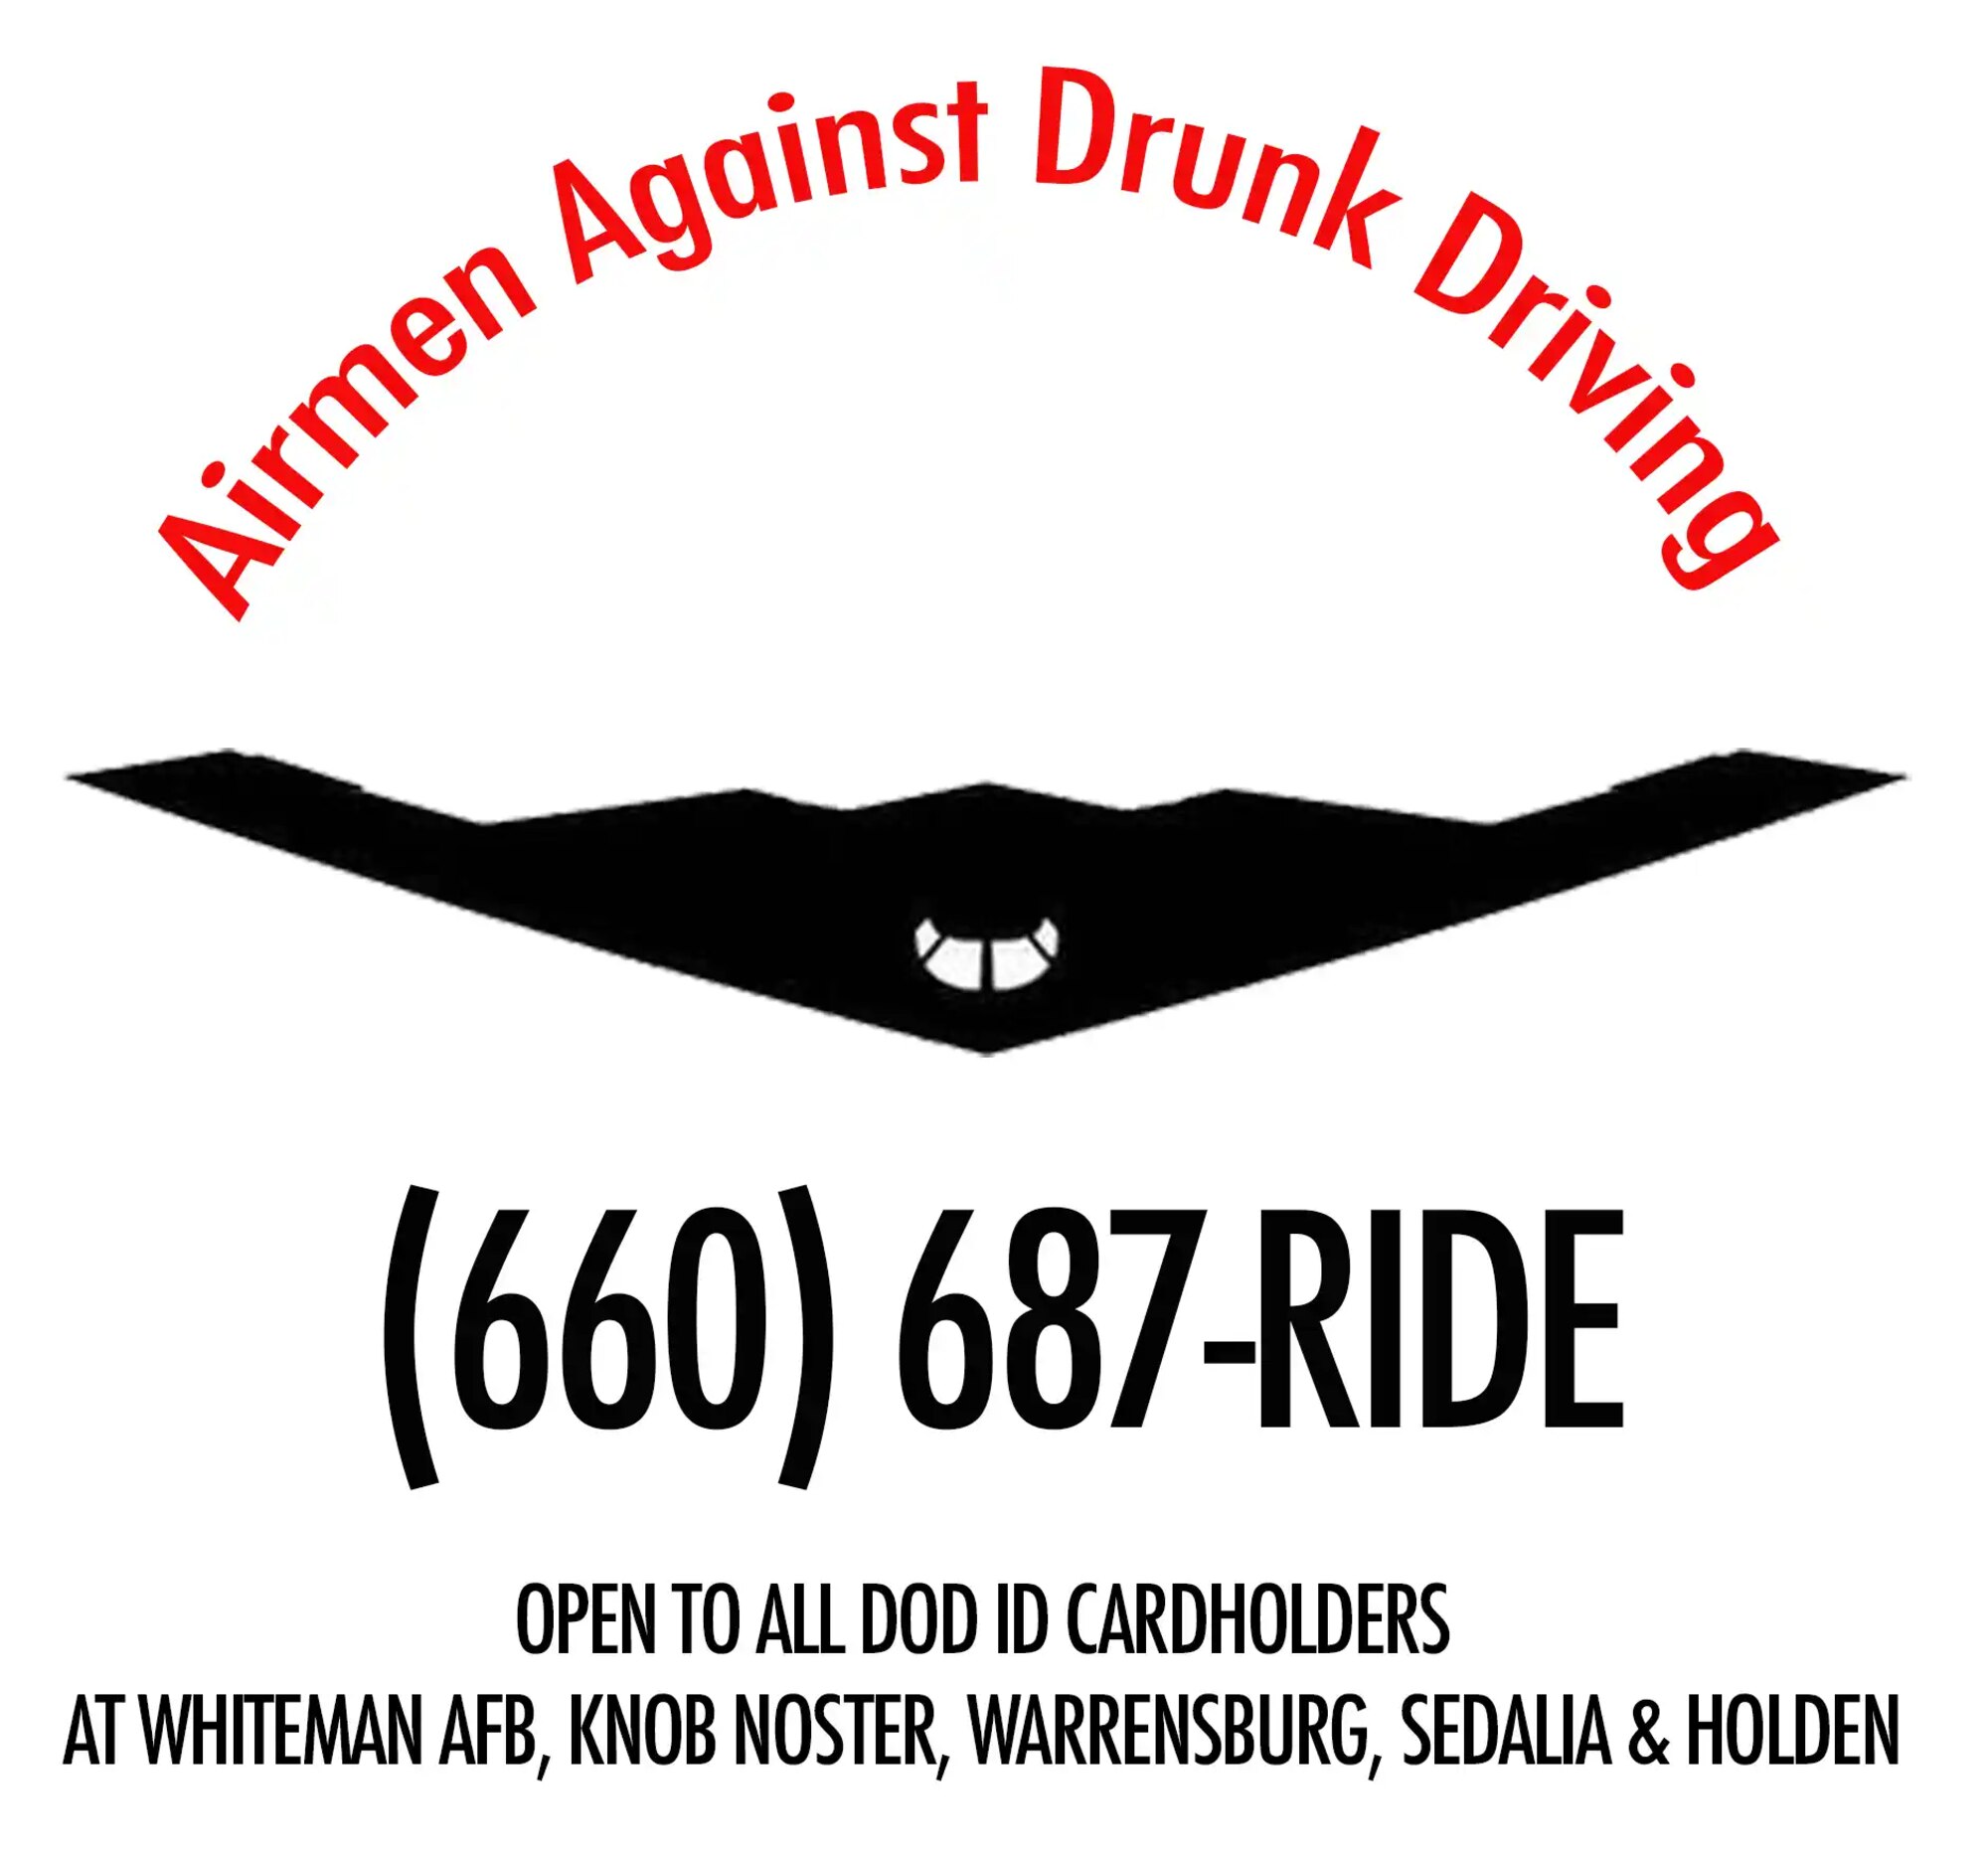 An infographic created to promote the Whiteman AFB chapter of Airmen Against Drunk Driving and the WAFB safe ride program.